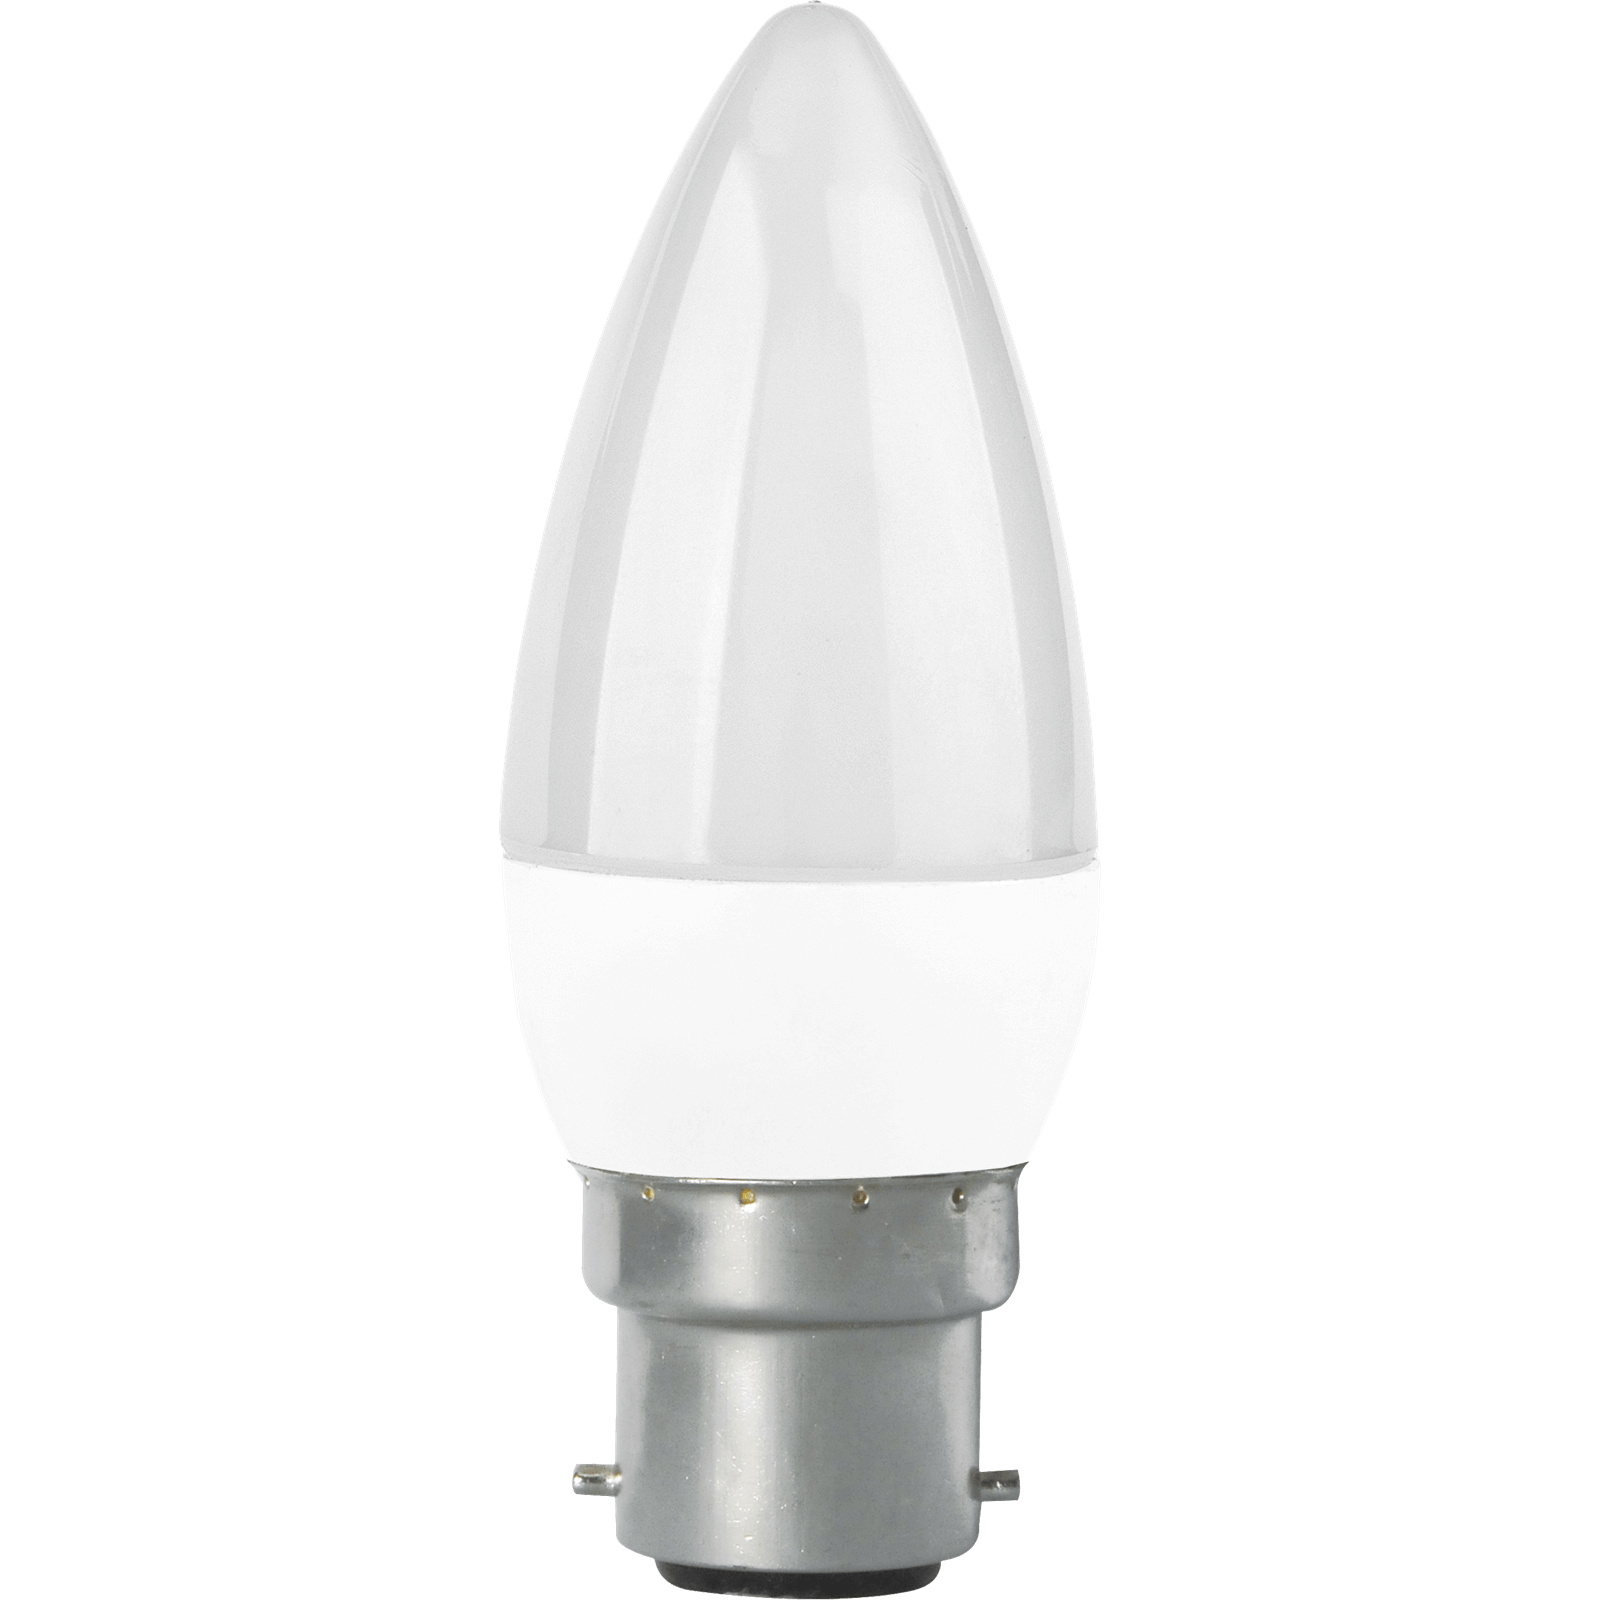 Photo of Tcp Led Candle 25w Bc Warm - 2 Pack